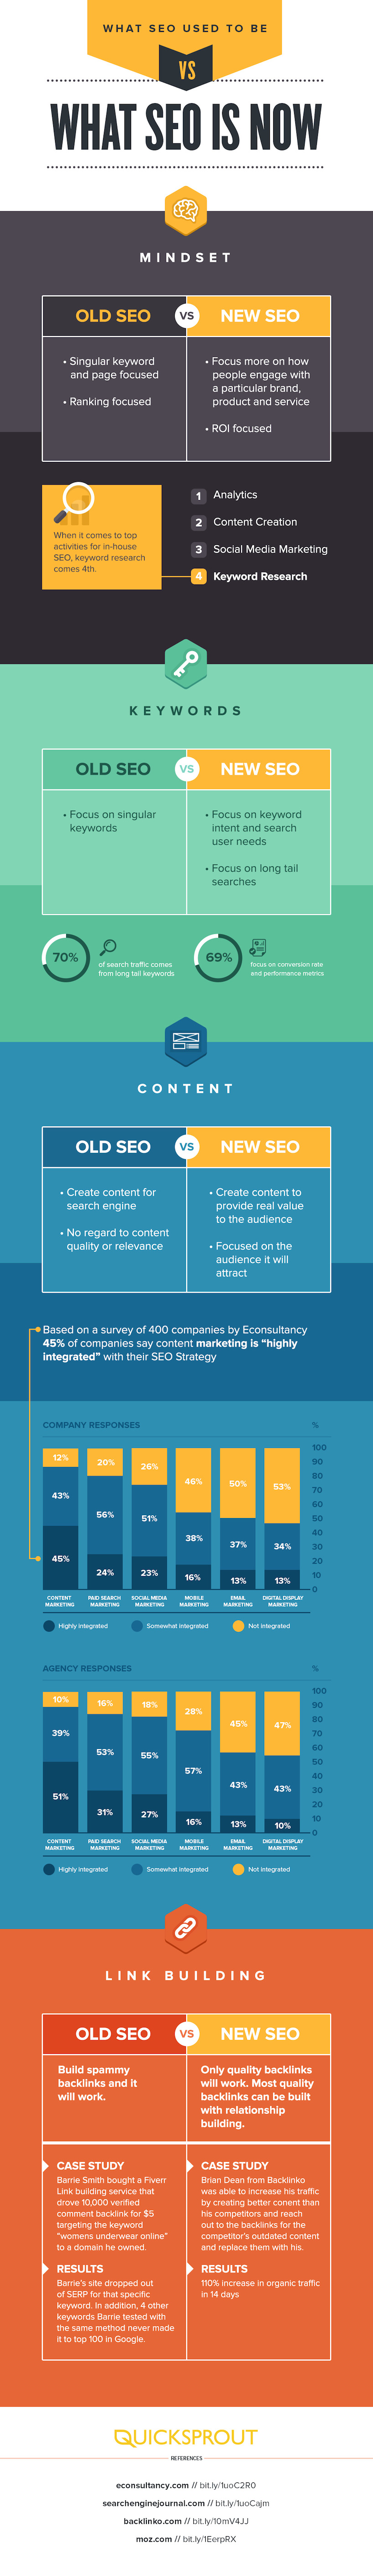 What SEO Used To Be Versus What SEO Is Now